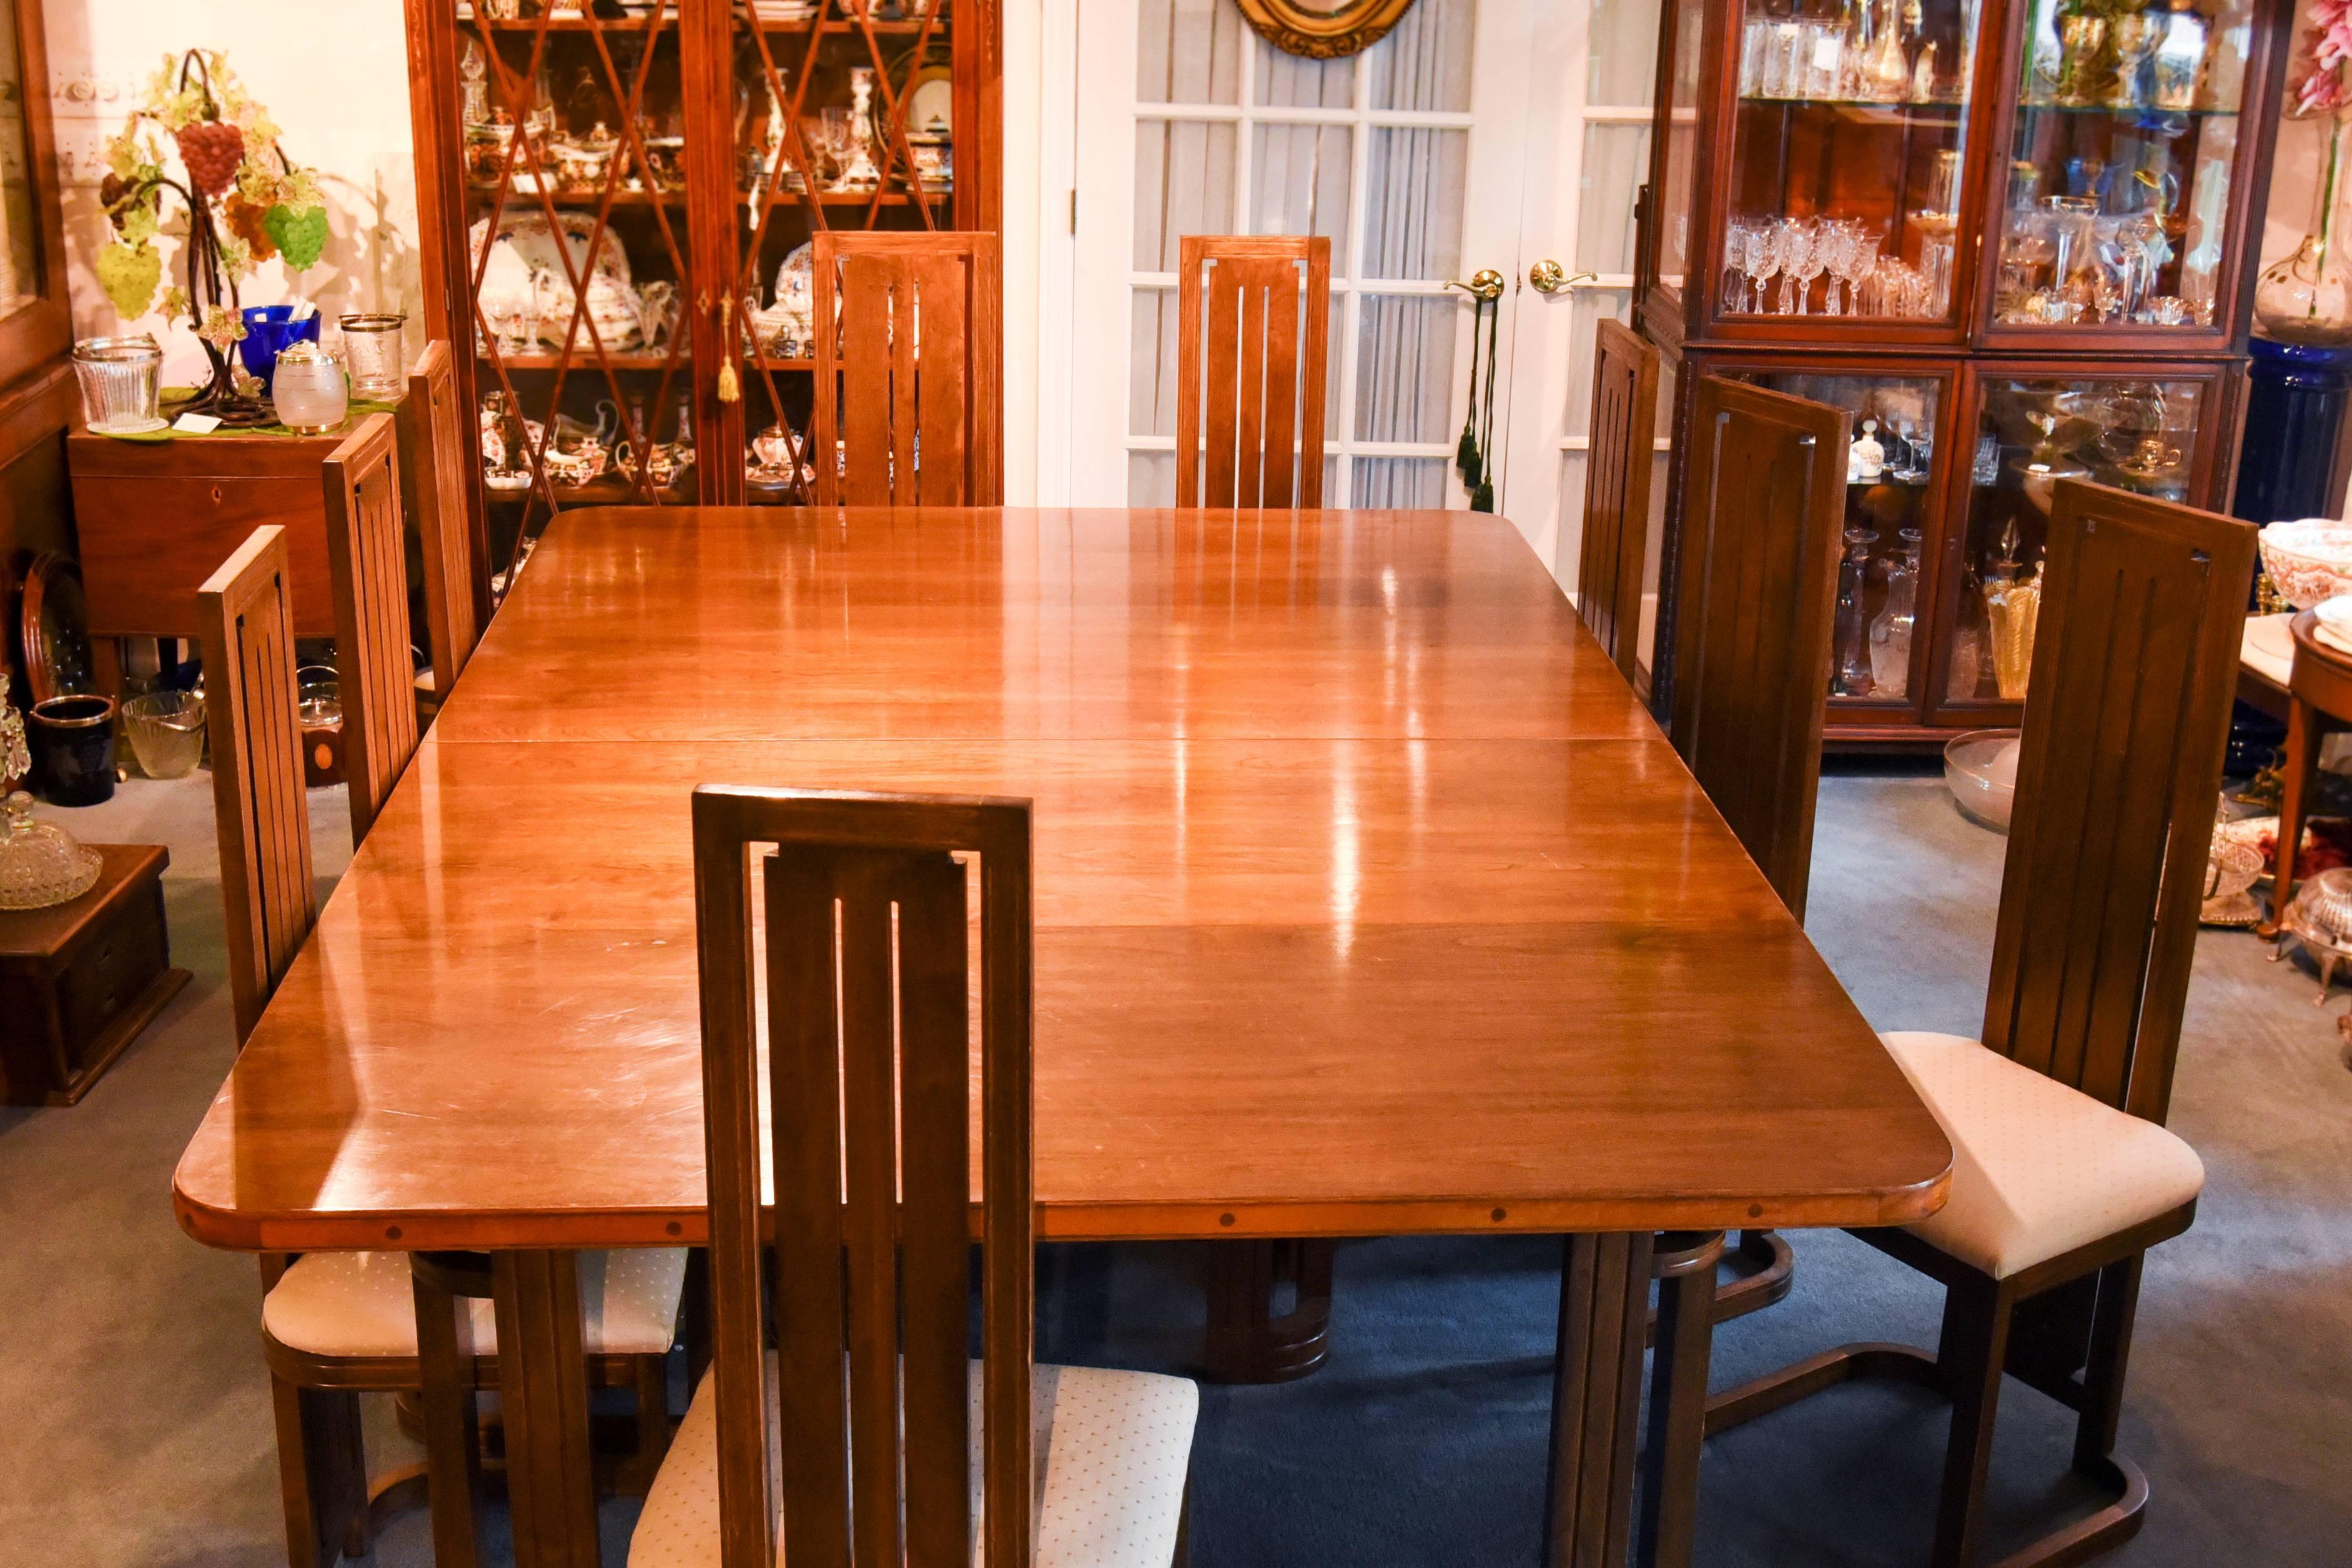 This is an amazing bench-made mahogany dining set with a large, exceptionally wide table and 12 matching chairs including 2 arm chairs and 10 side chairs. The workmanship is fabulous, detailed and iconic. The table is made up of fruitwoods and